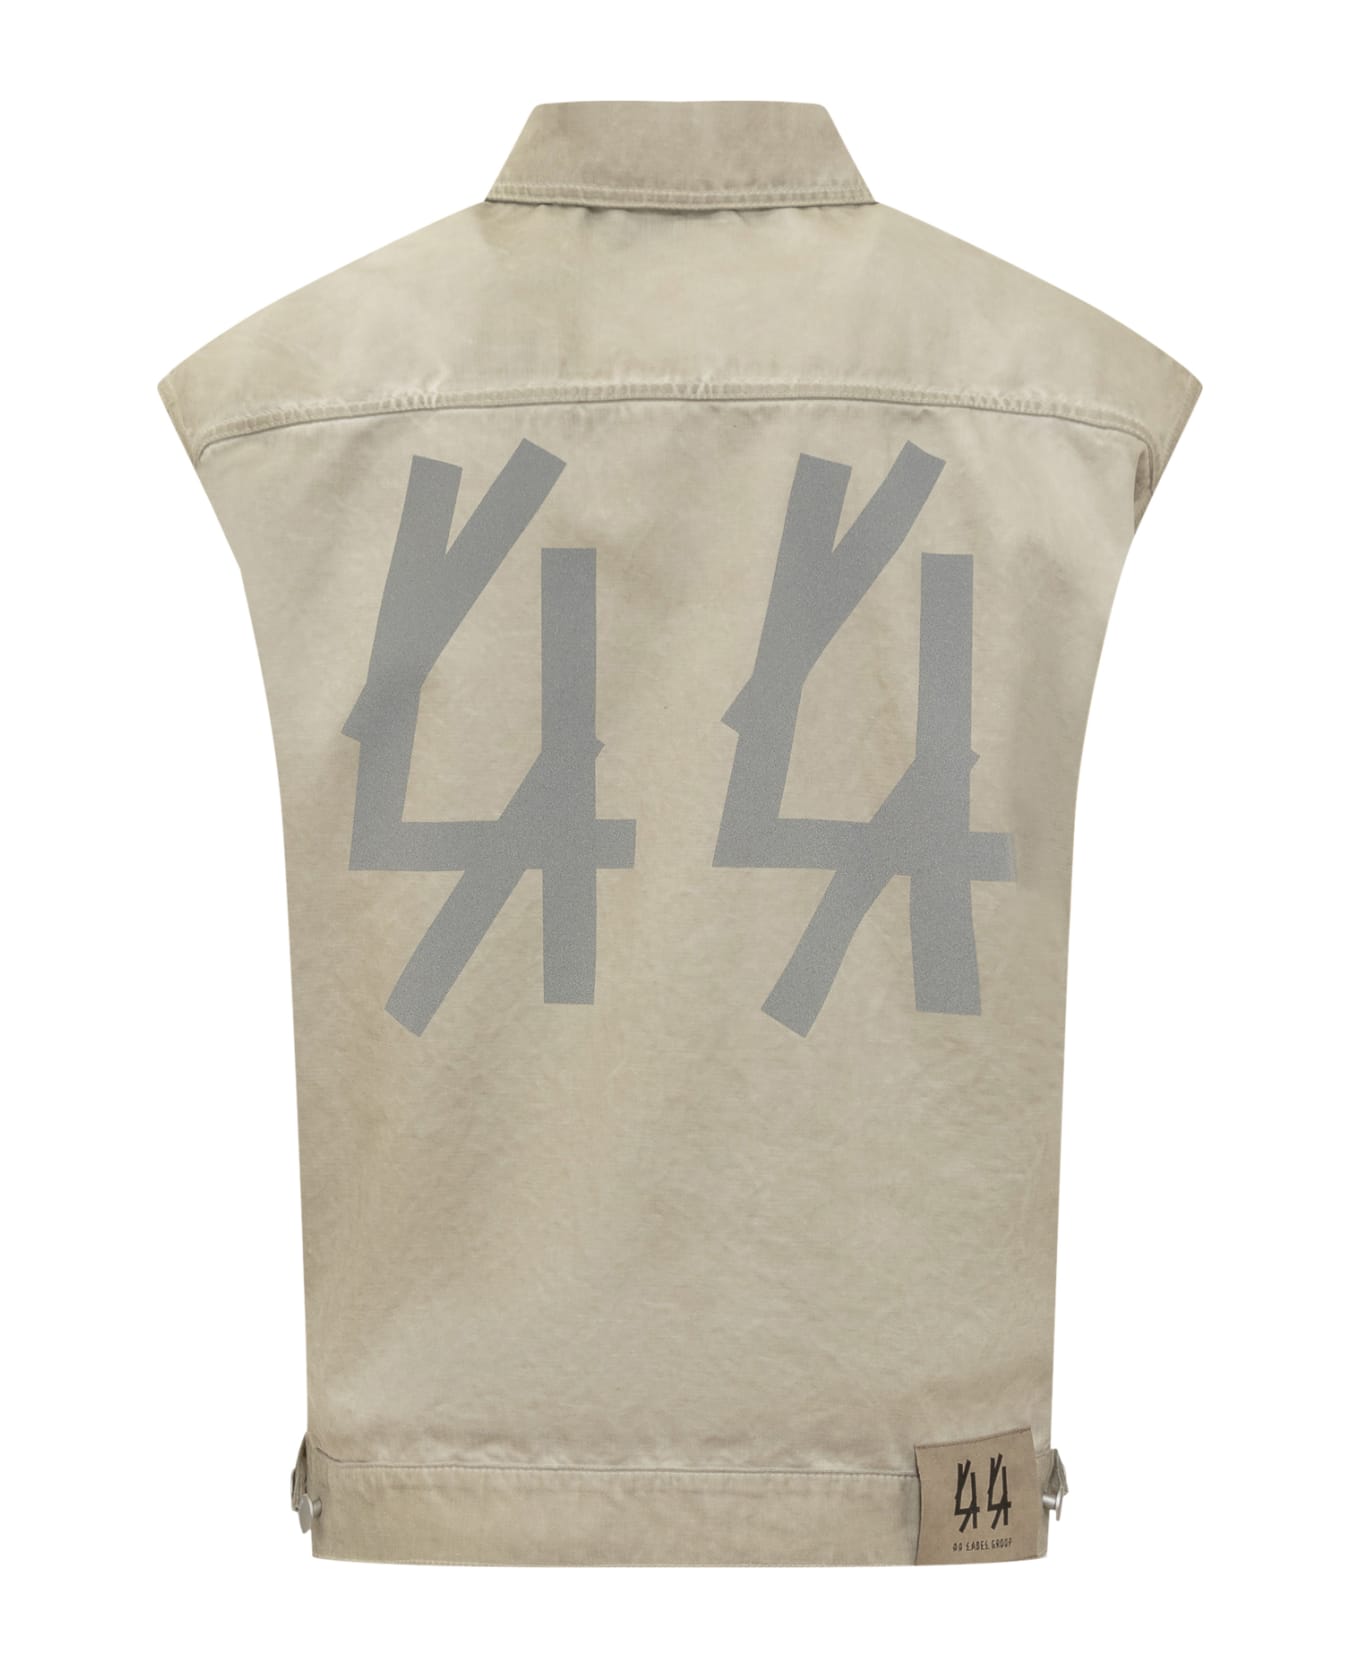 44 Label Group Vest With Logo - SAND ベスト